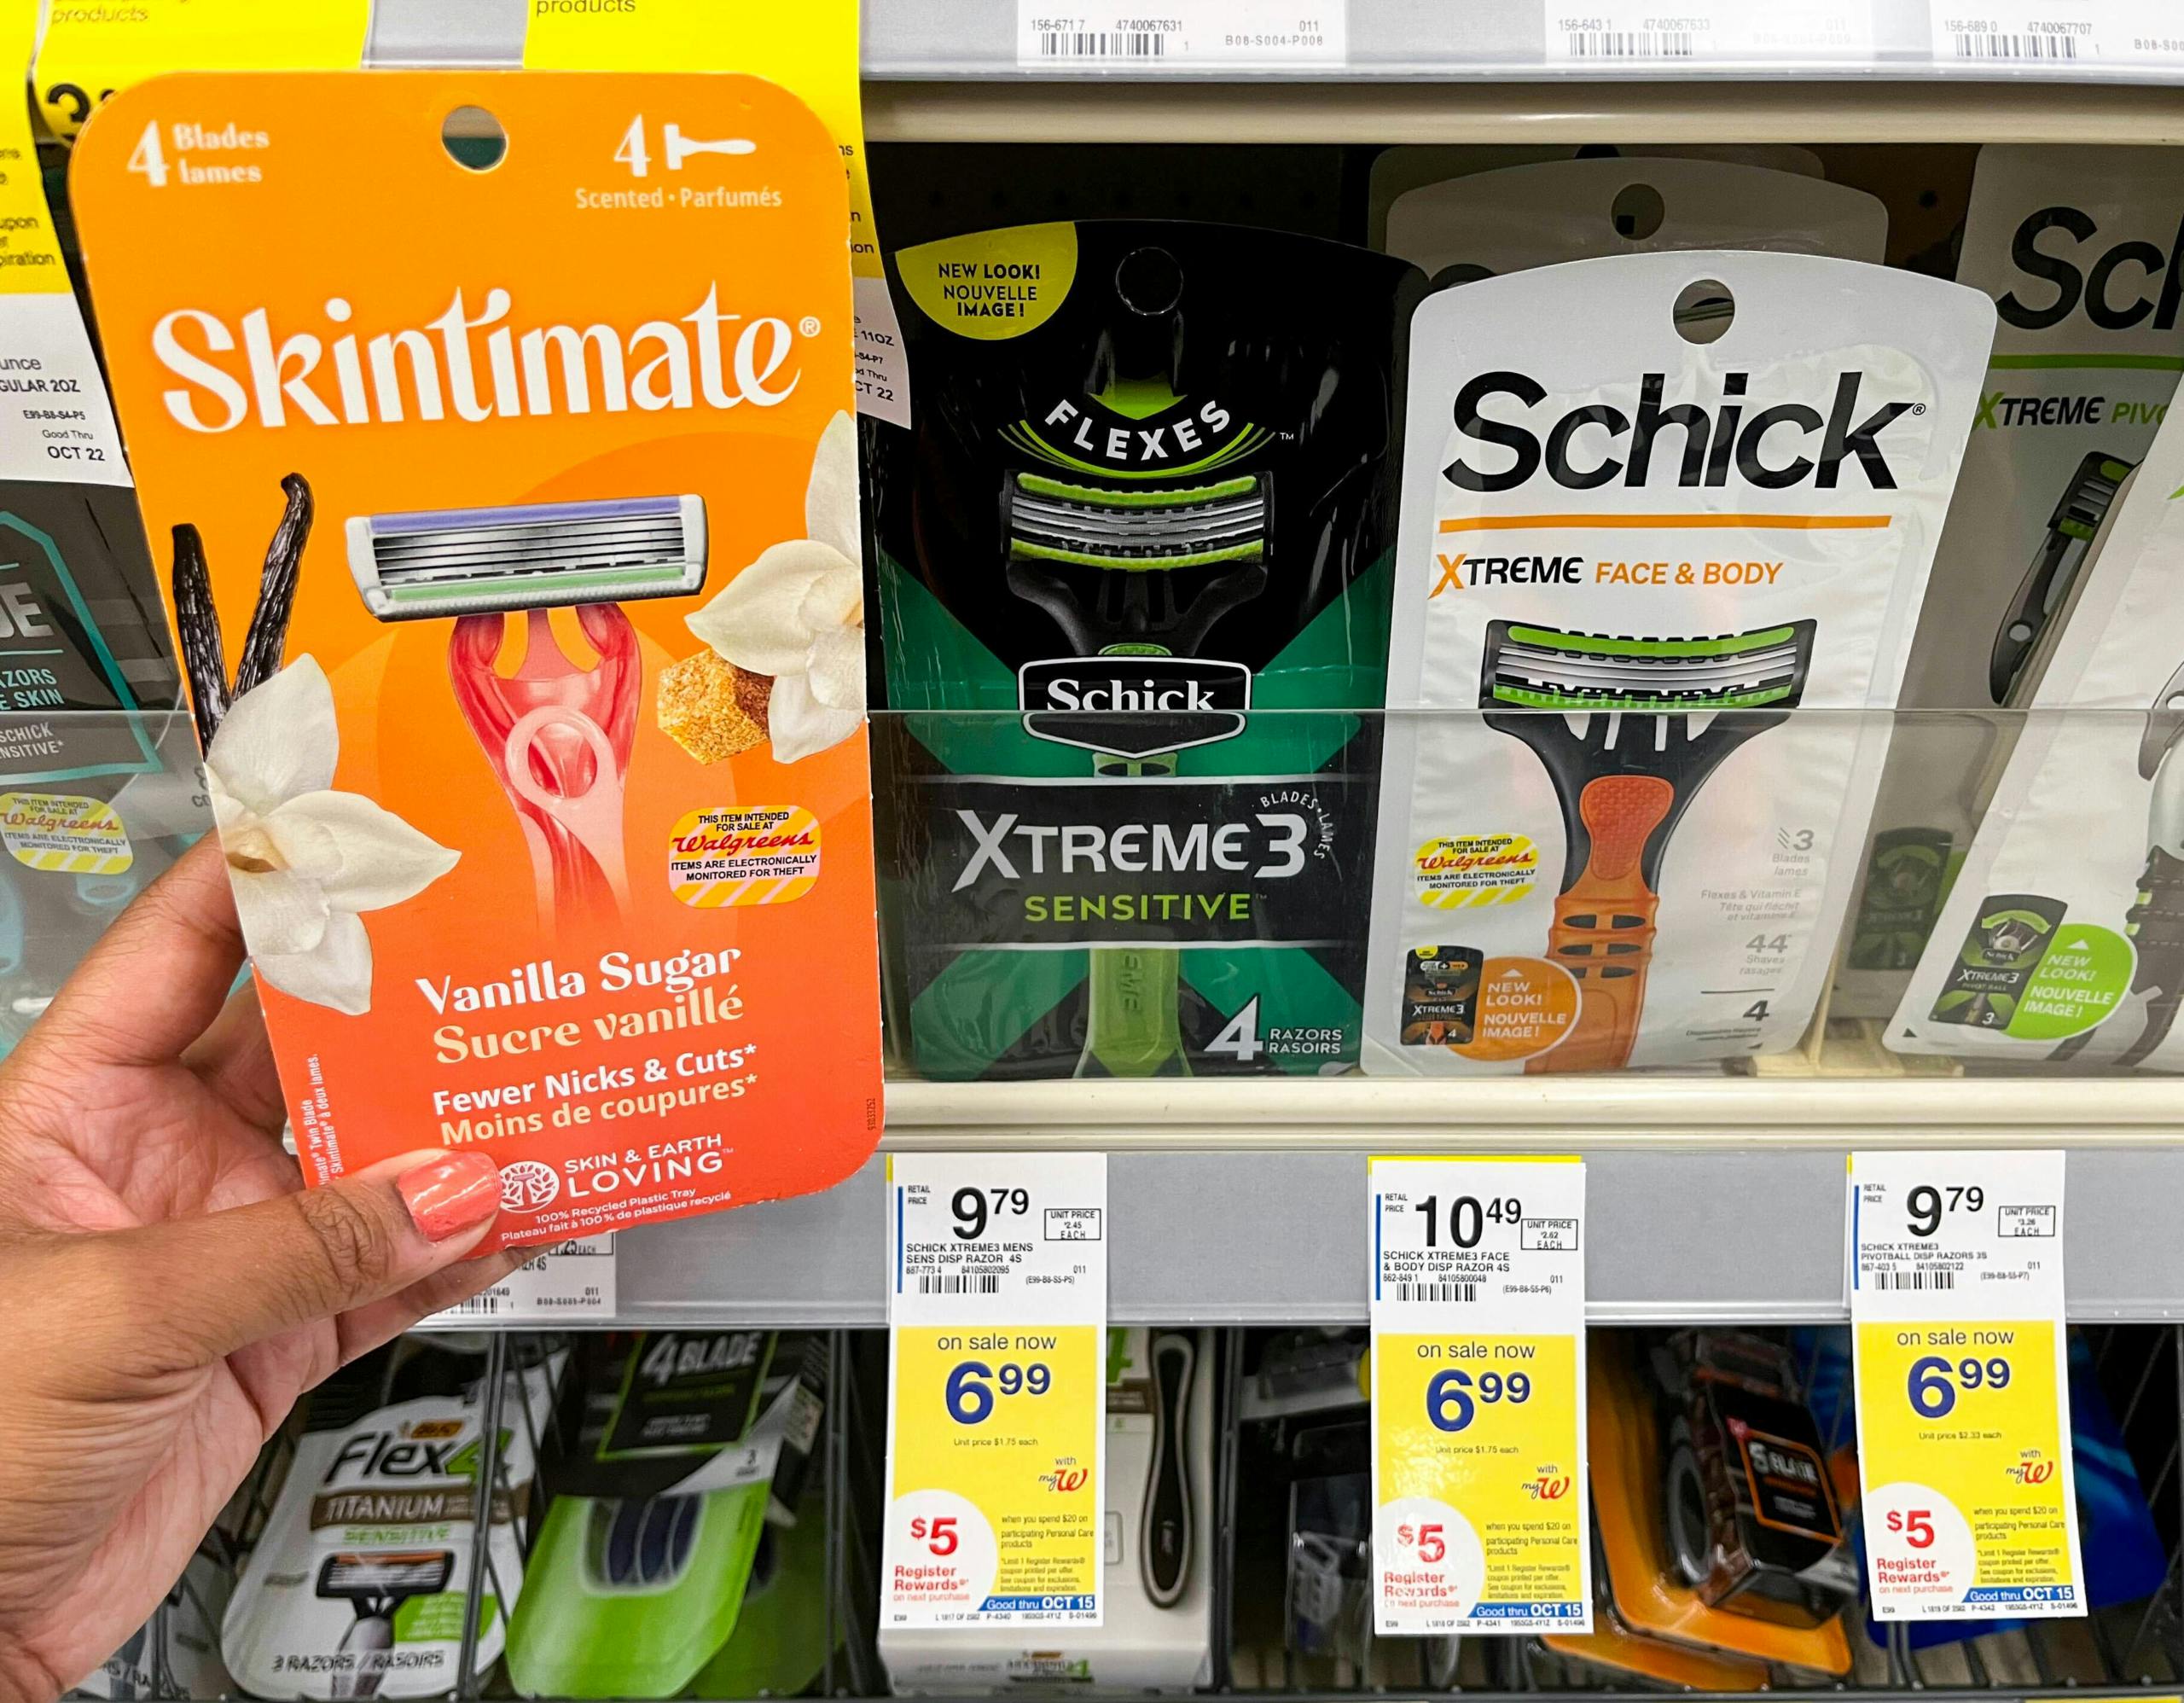 Schick or Skintimate Razor, Only 2.99 at Walgreens The Krazy Coupon Lady